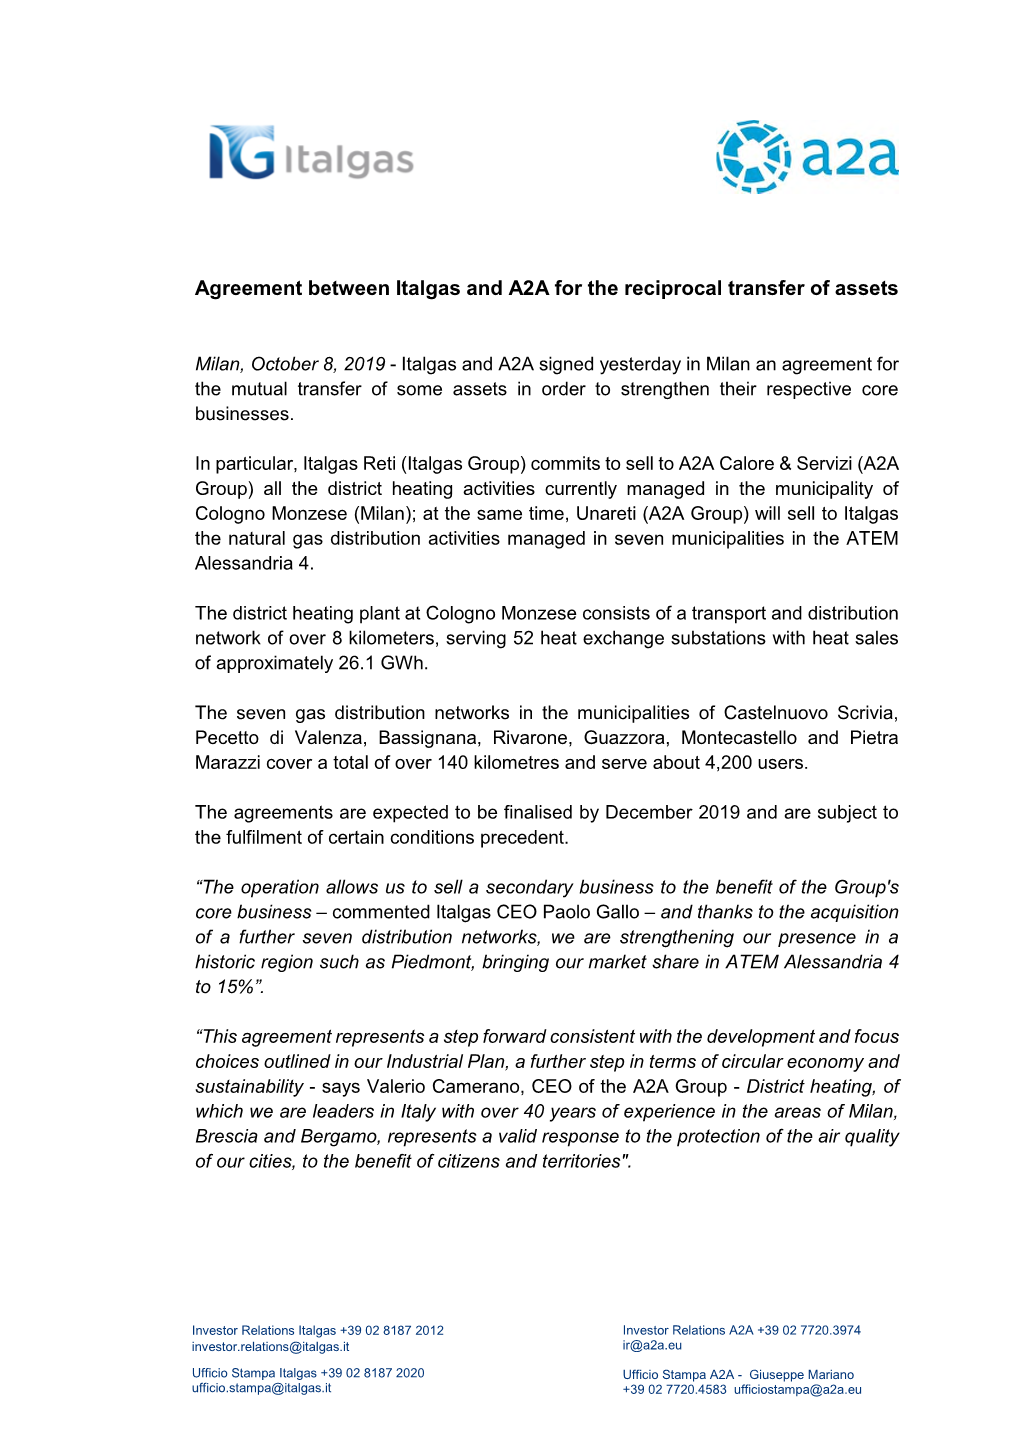 Agreement Between Italgas and A2A for the Reciprocal Transfer of Assets